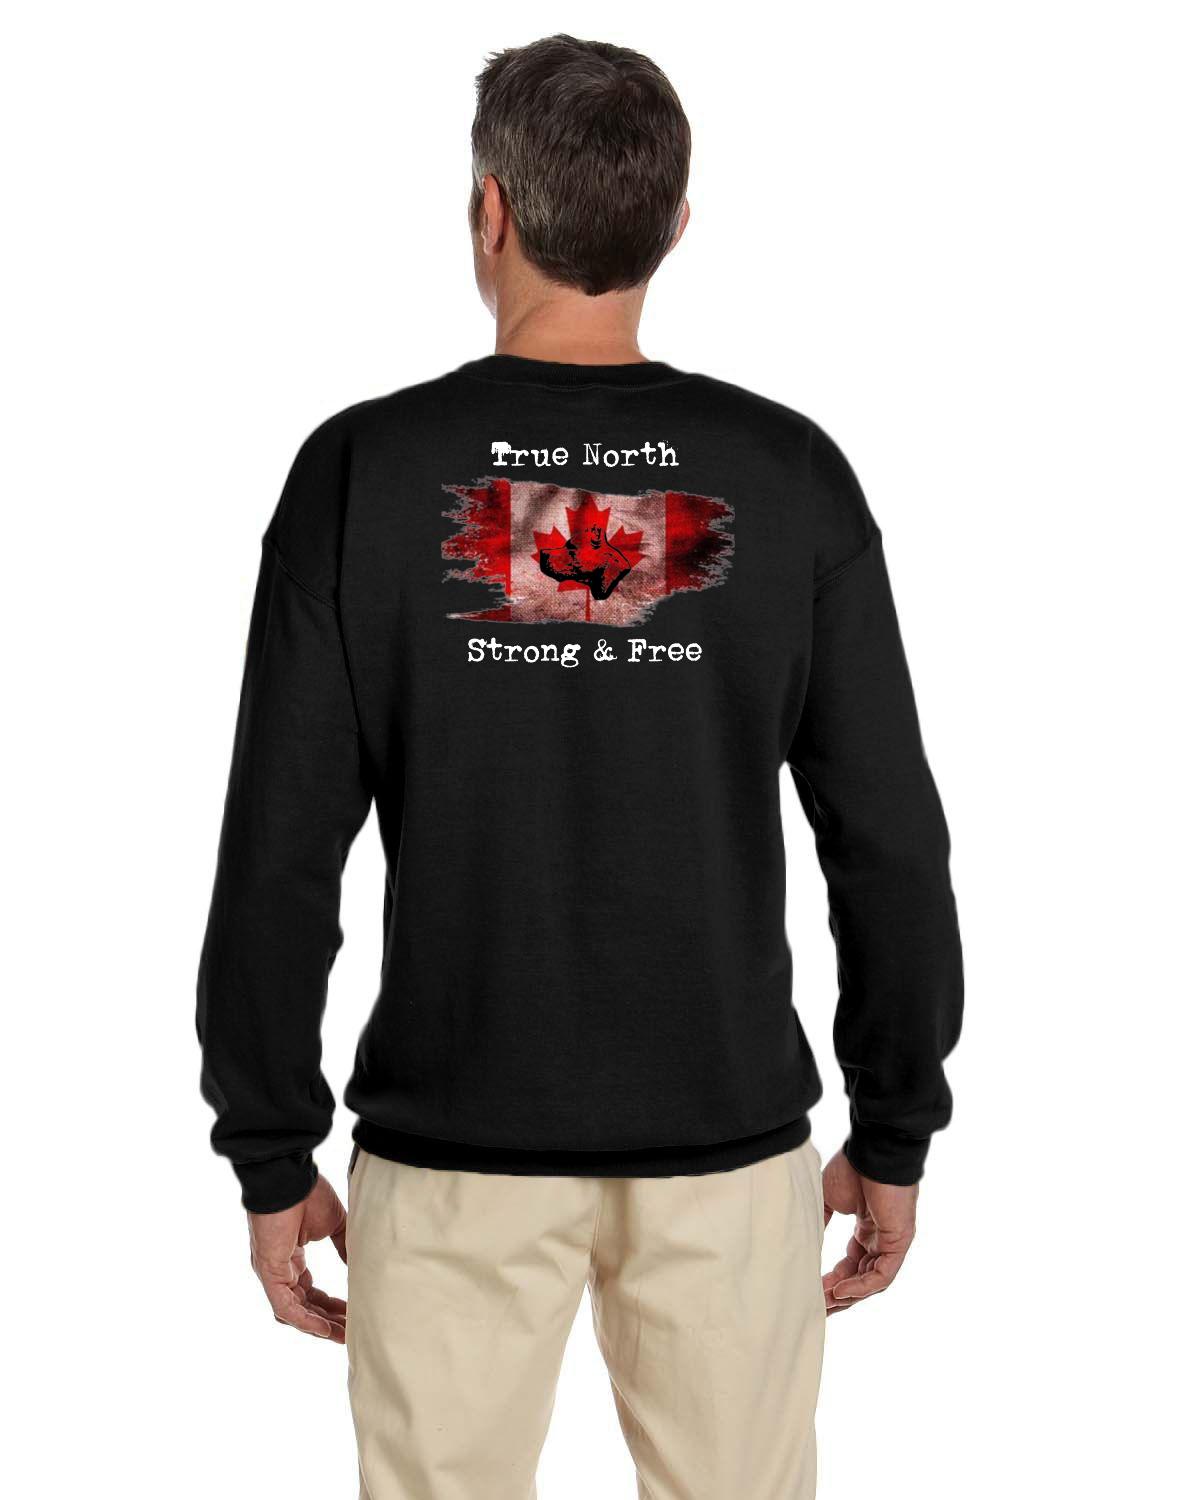 CDAC "True North Strong & Free" Adult Crewneck Sweater dark Colours